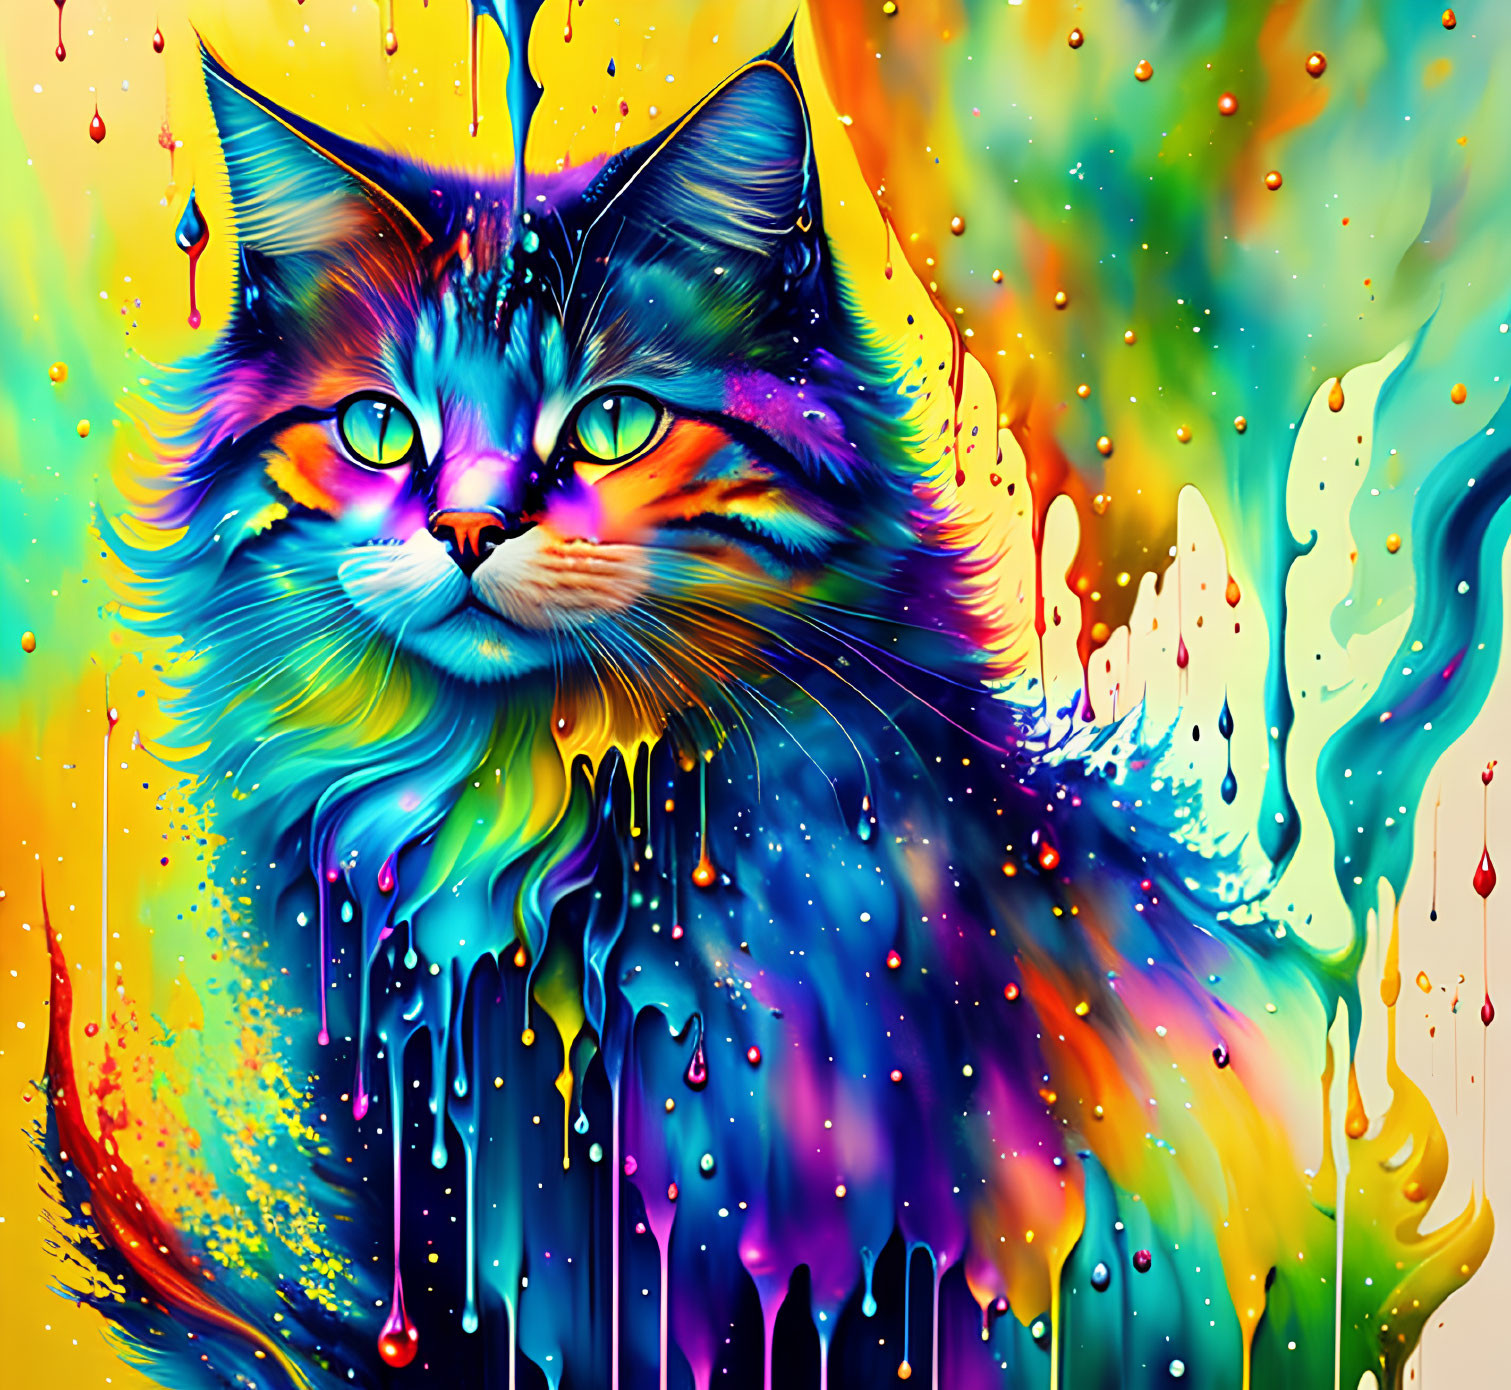 Colorful Psychedelic Cat Portrait with Melting Effects on Yellow Background